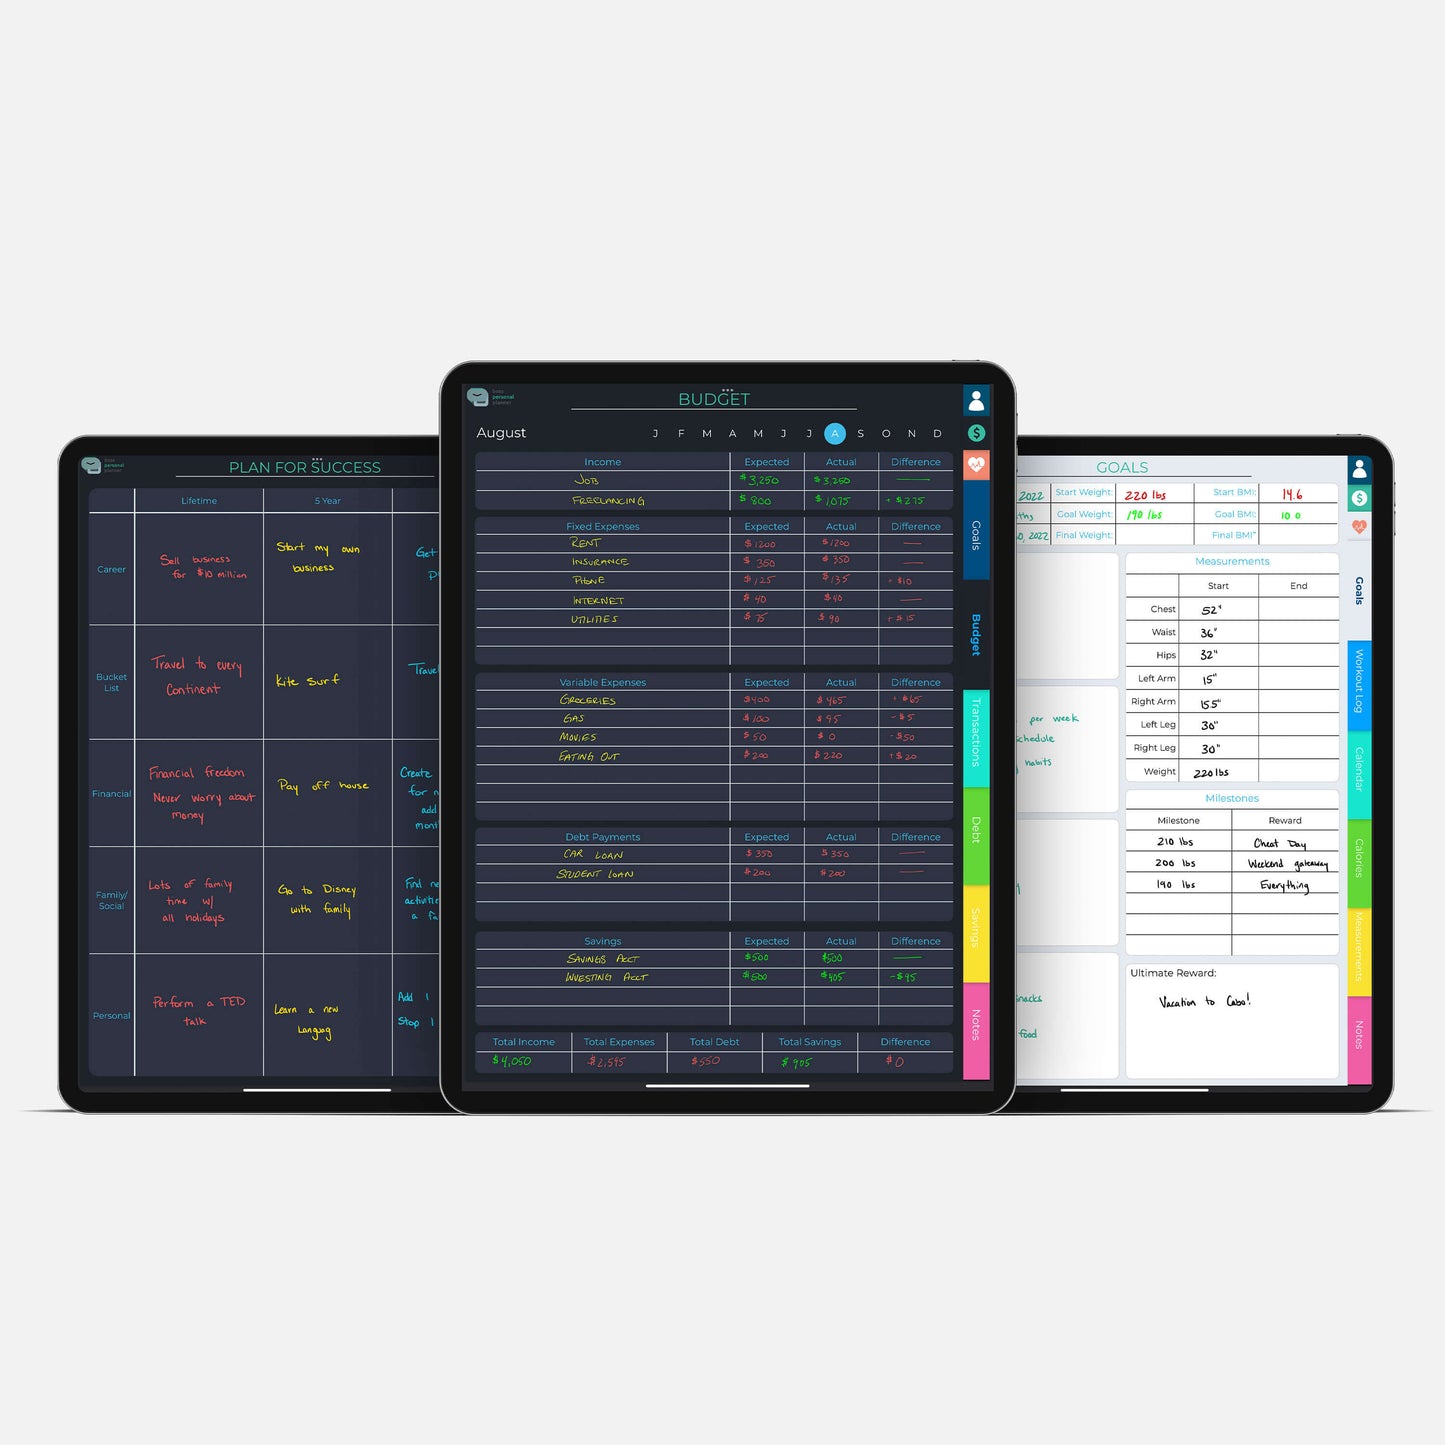 Digital Life Planner 3 planner view examples